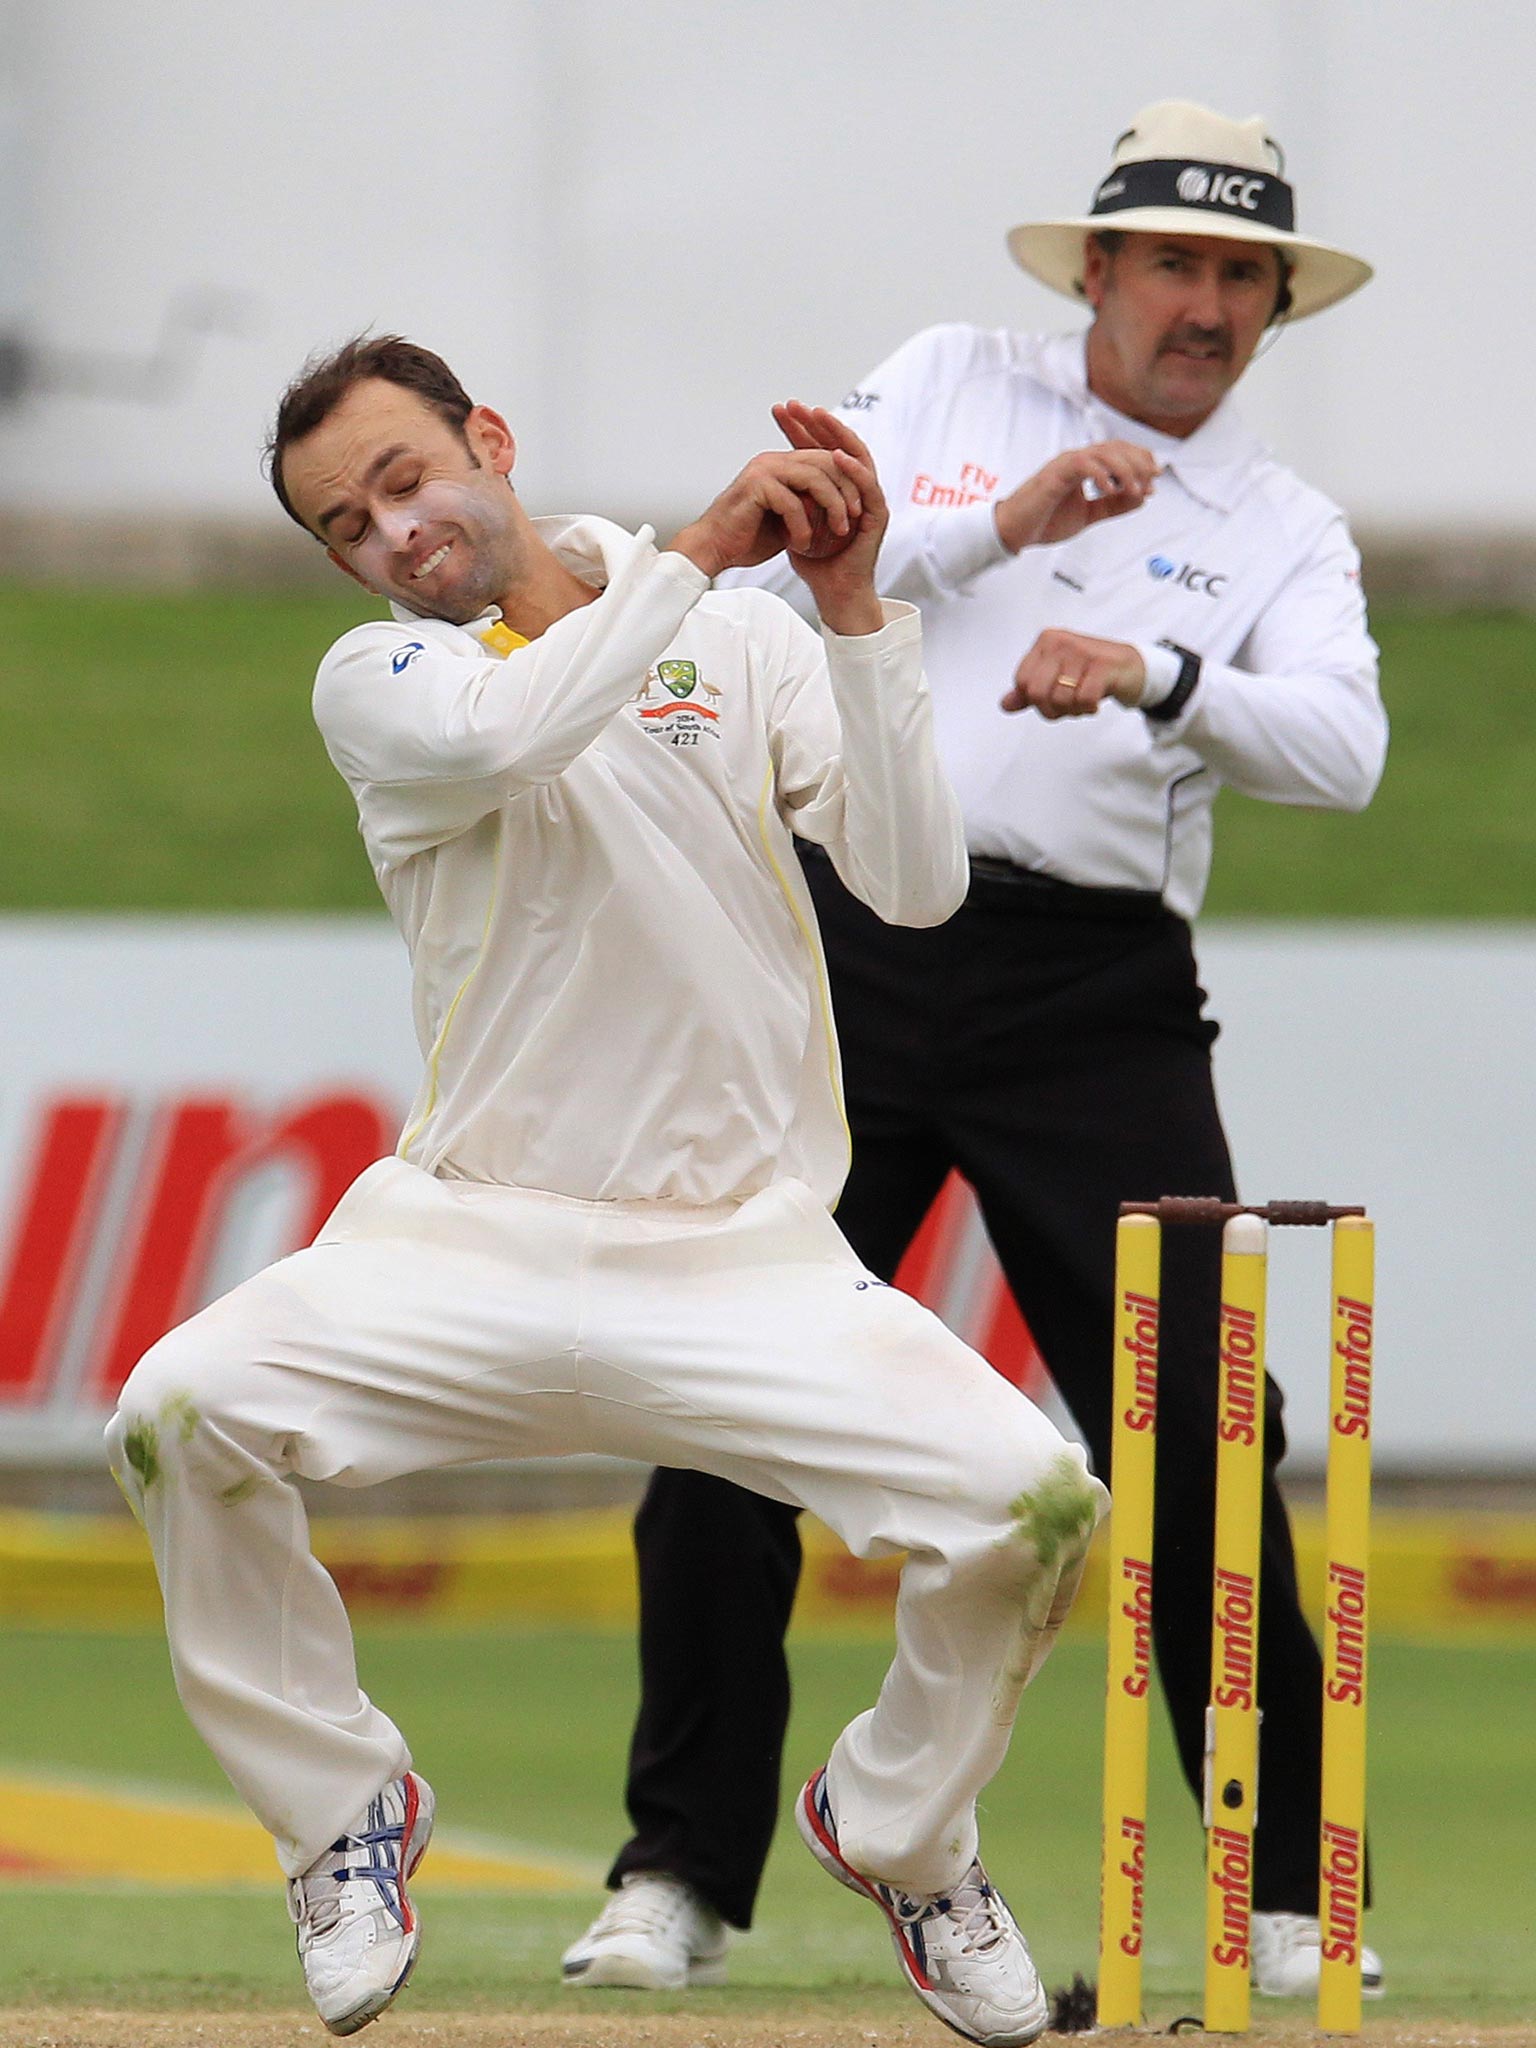 Australia spinner Nathan Lyon fields the ball from his own bowling as umpire Richard Illingworth prepares for evasive action in the background